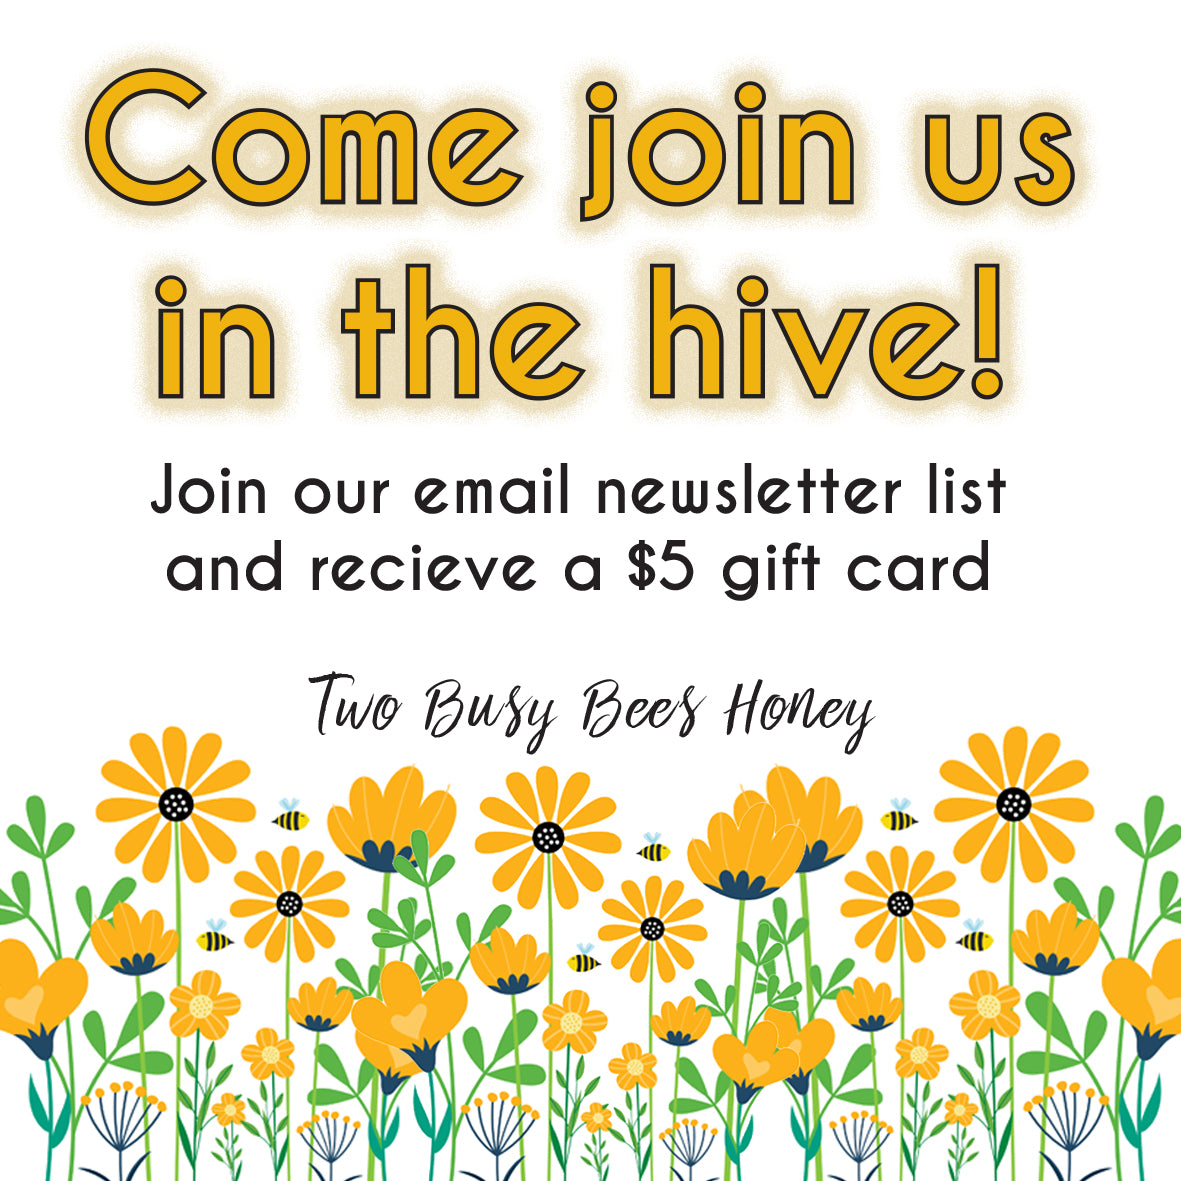 Email Newsletter Subscription - Two Busy Bees Honey